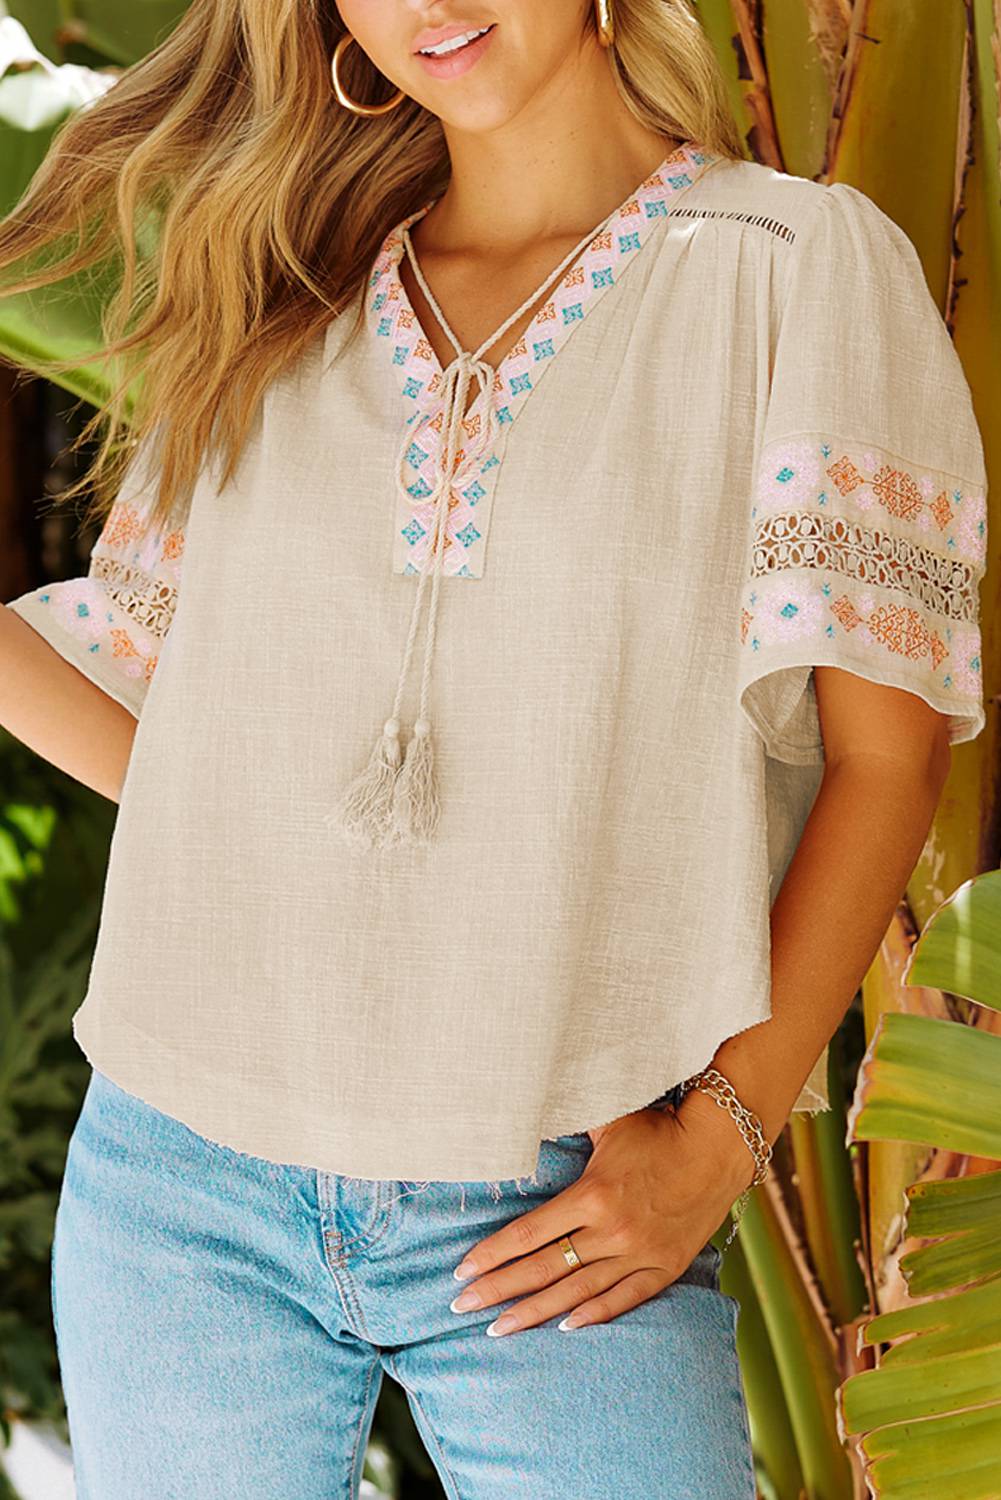 Tassel Drawstring Embroidered Top